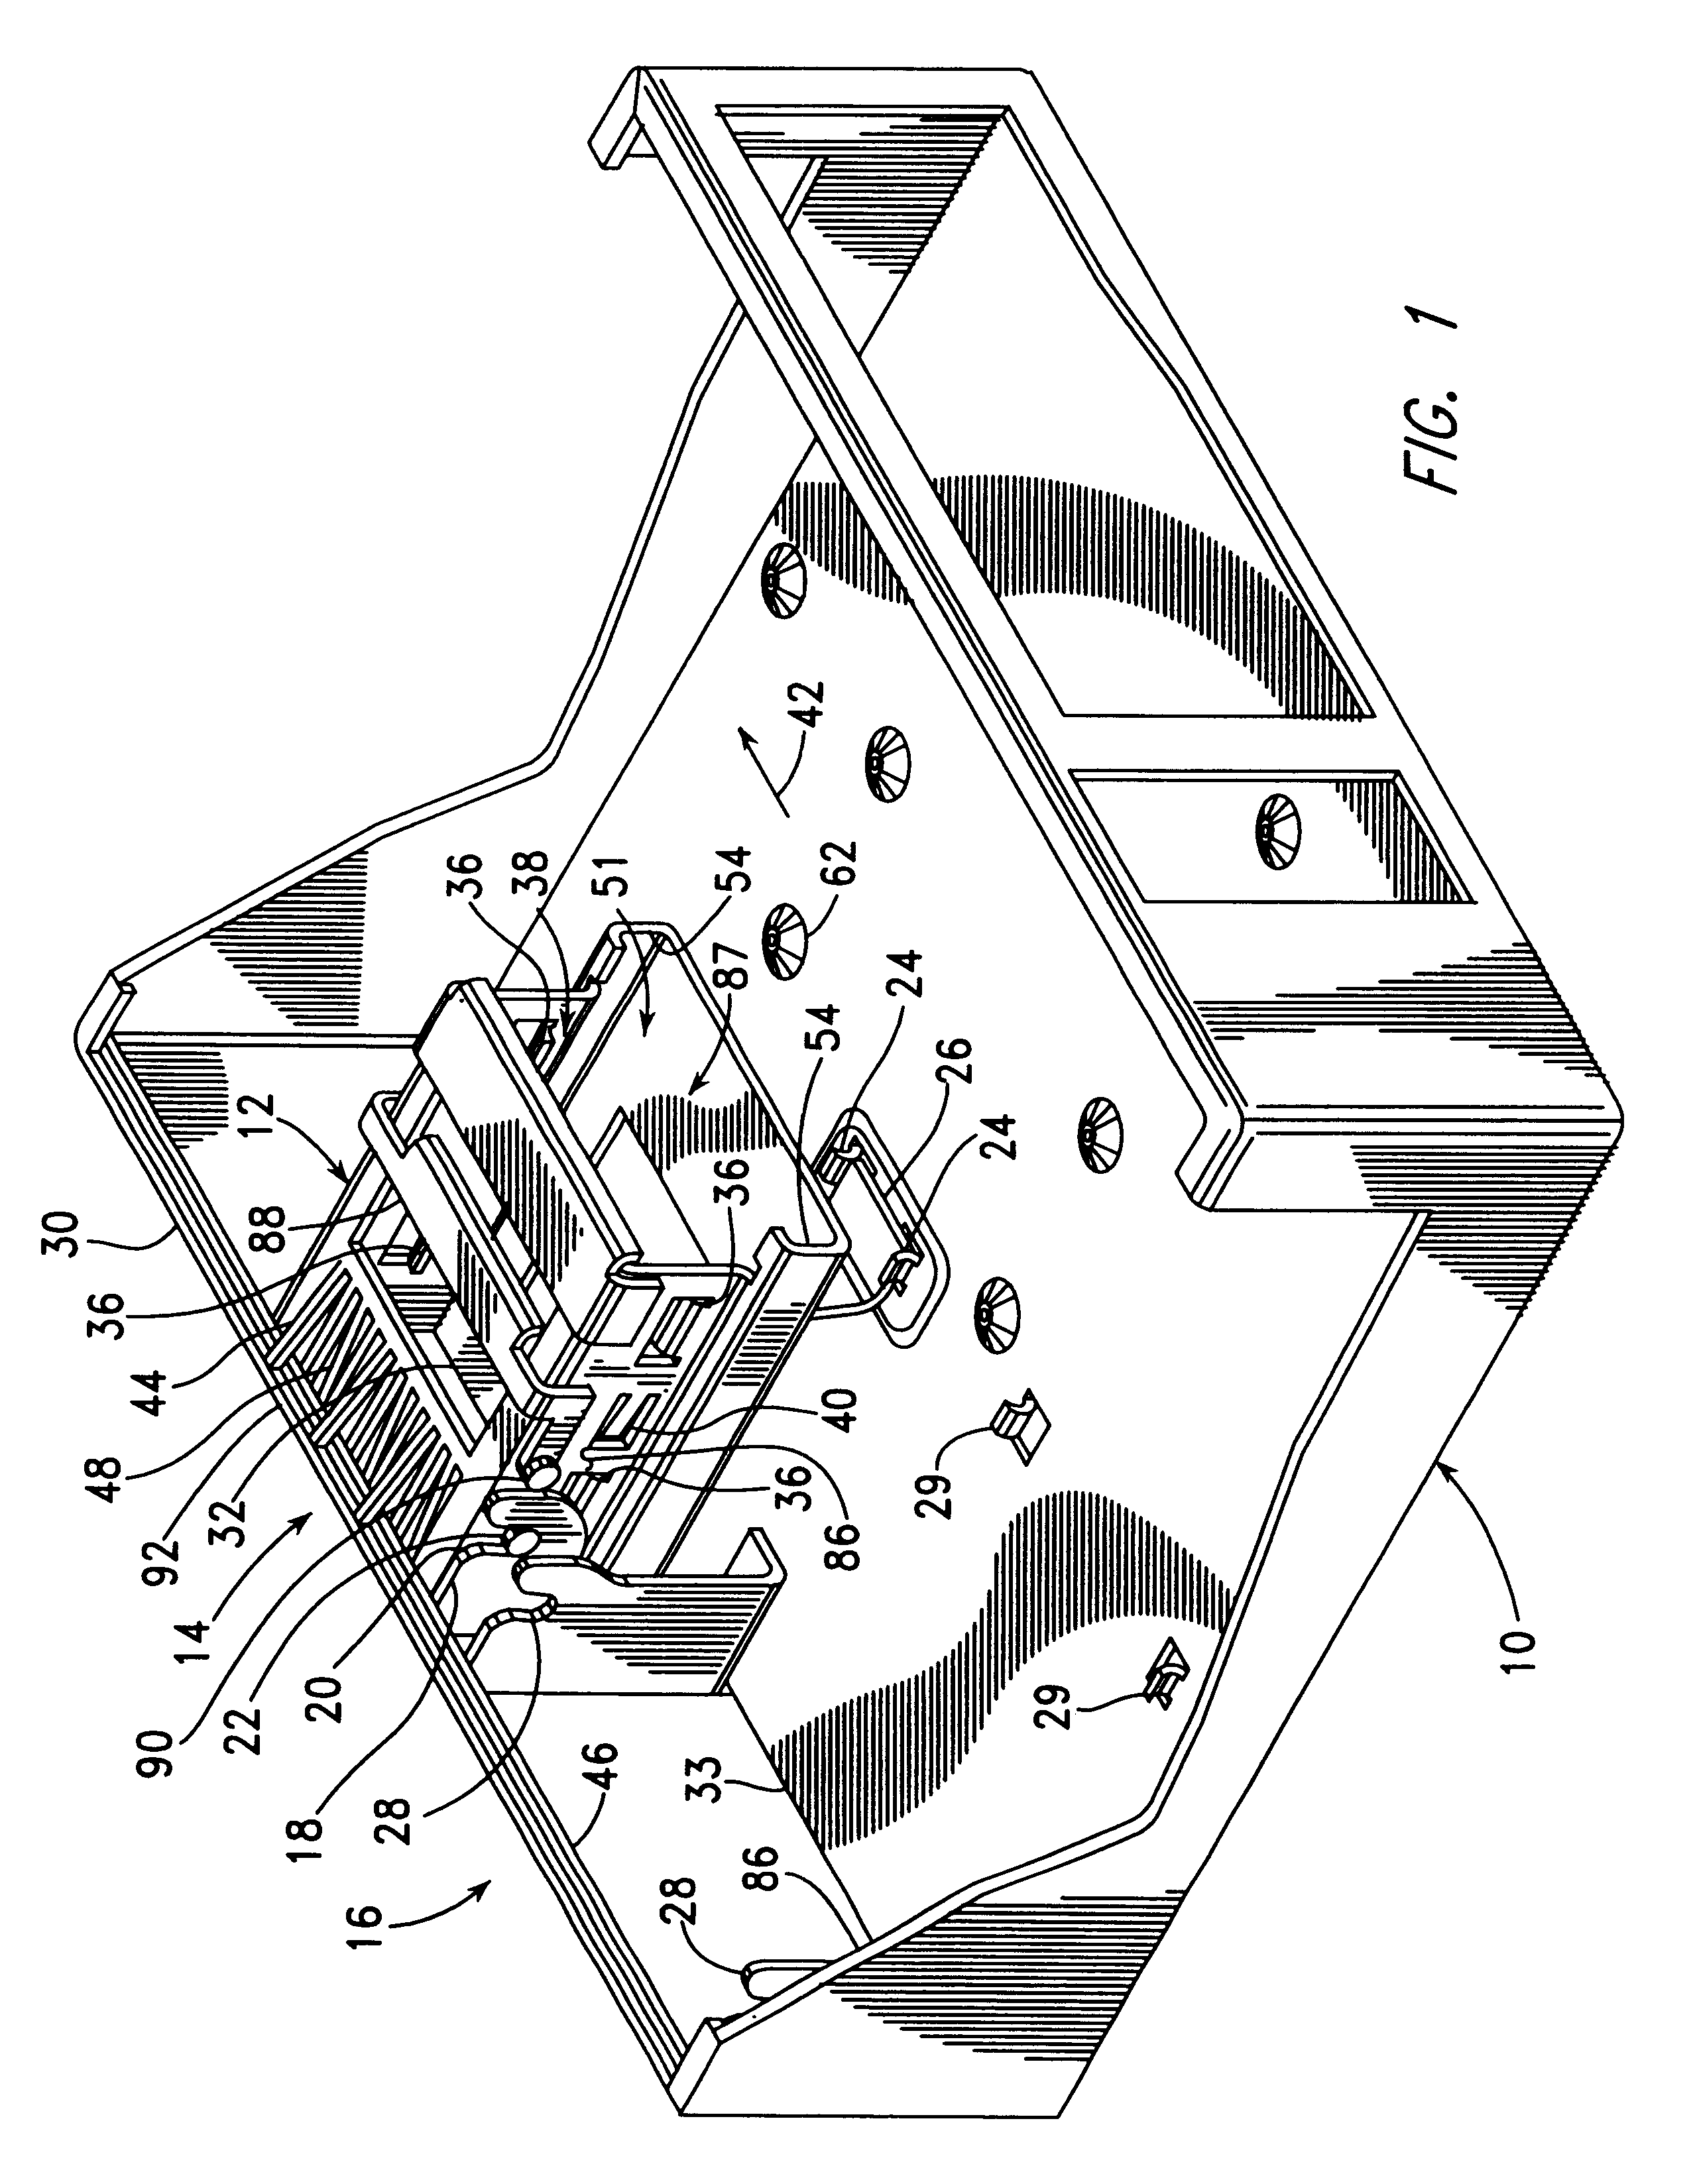 Removable structures for mounting computer drive devices, pivotable between operating and service positions